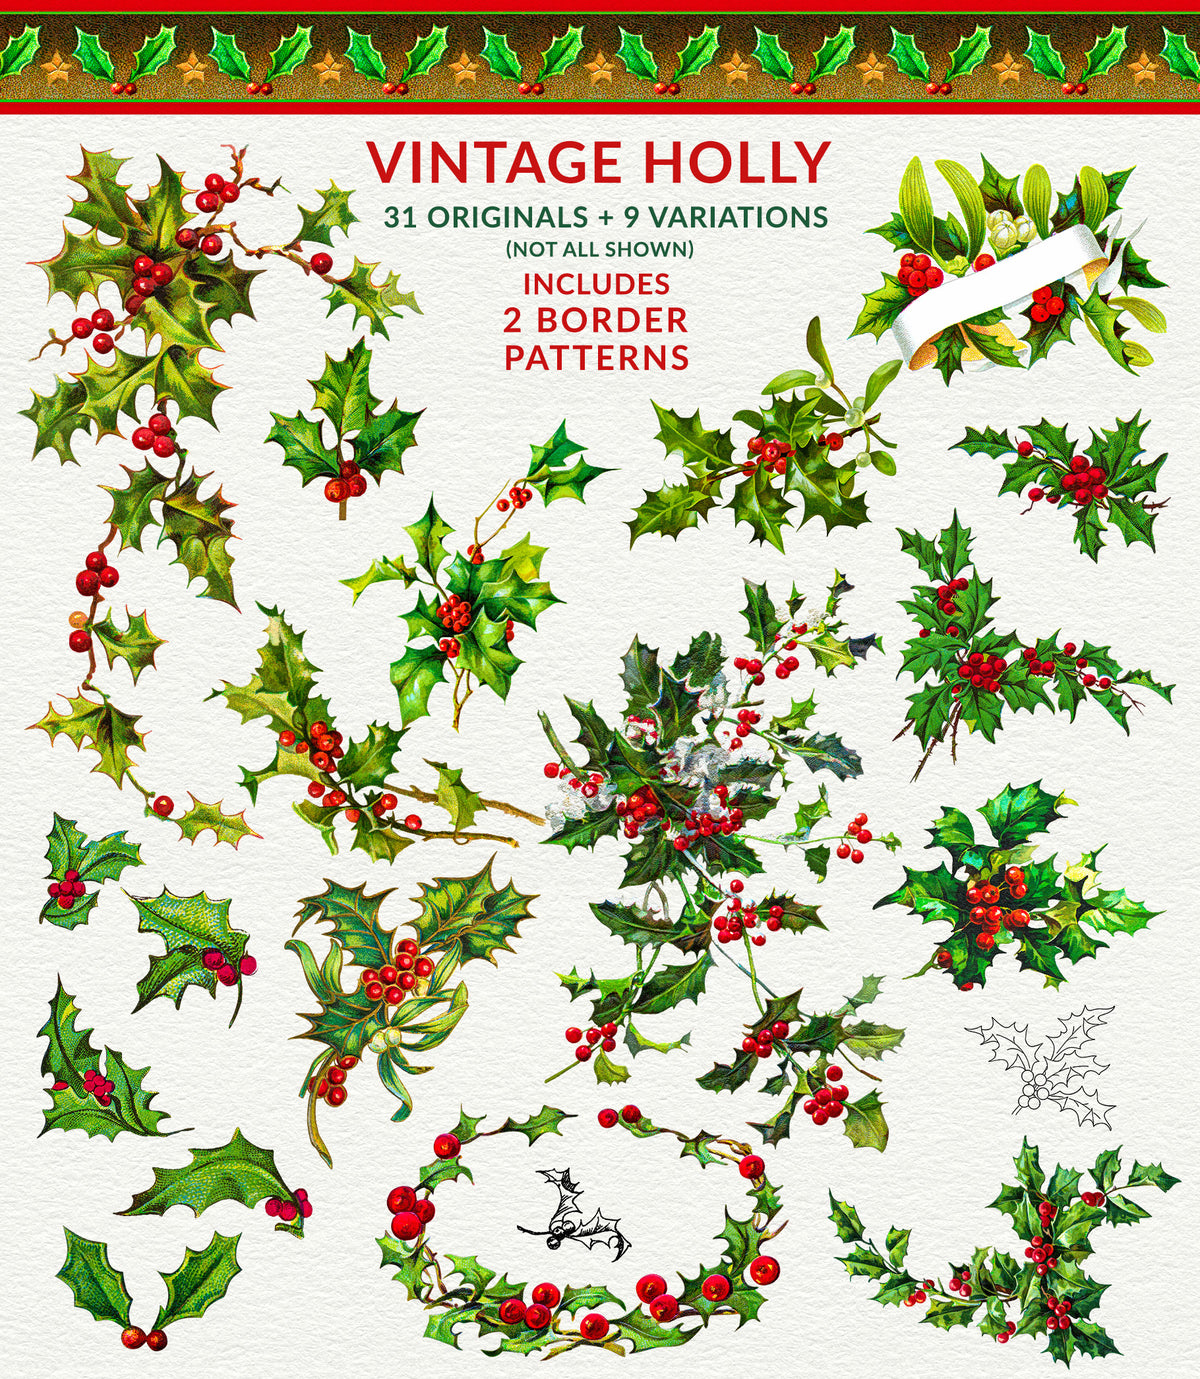 Vintage Holly clip art illustrations from the Vintage Christmas Illustrations Compendium.